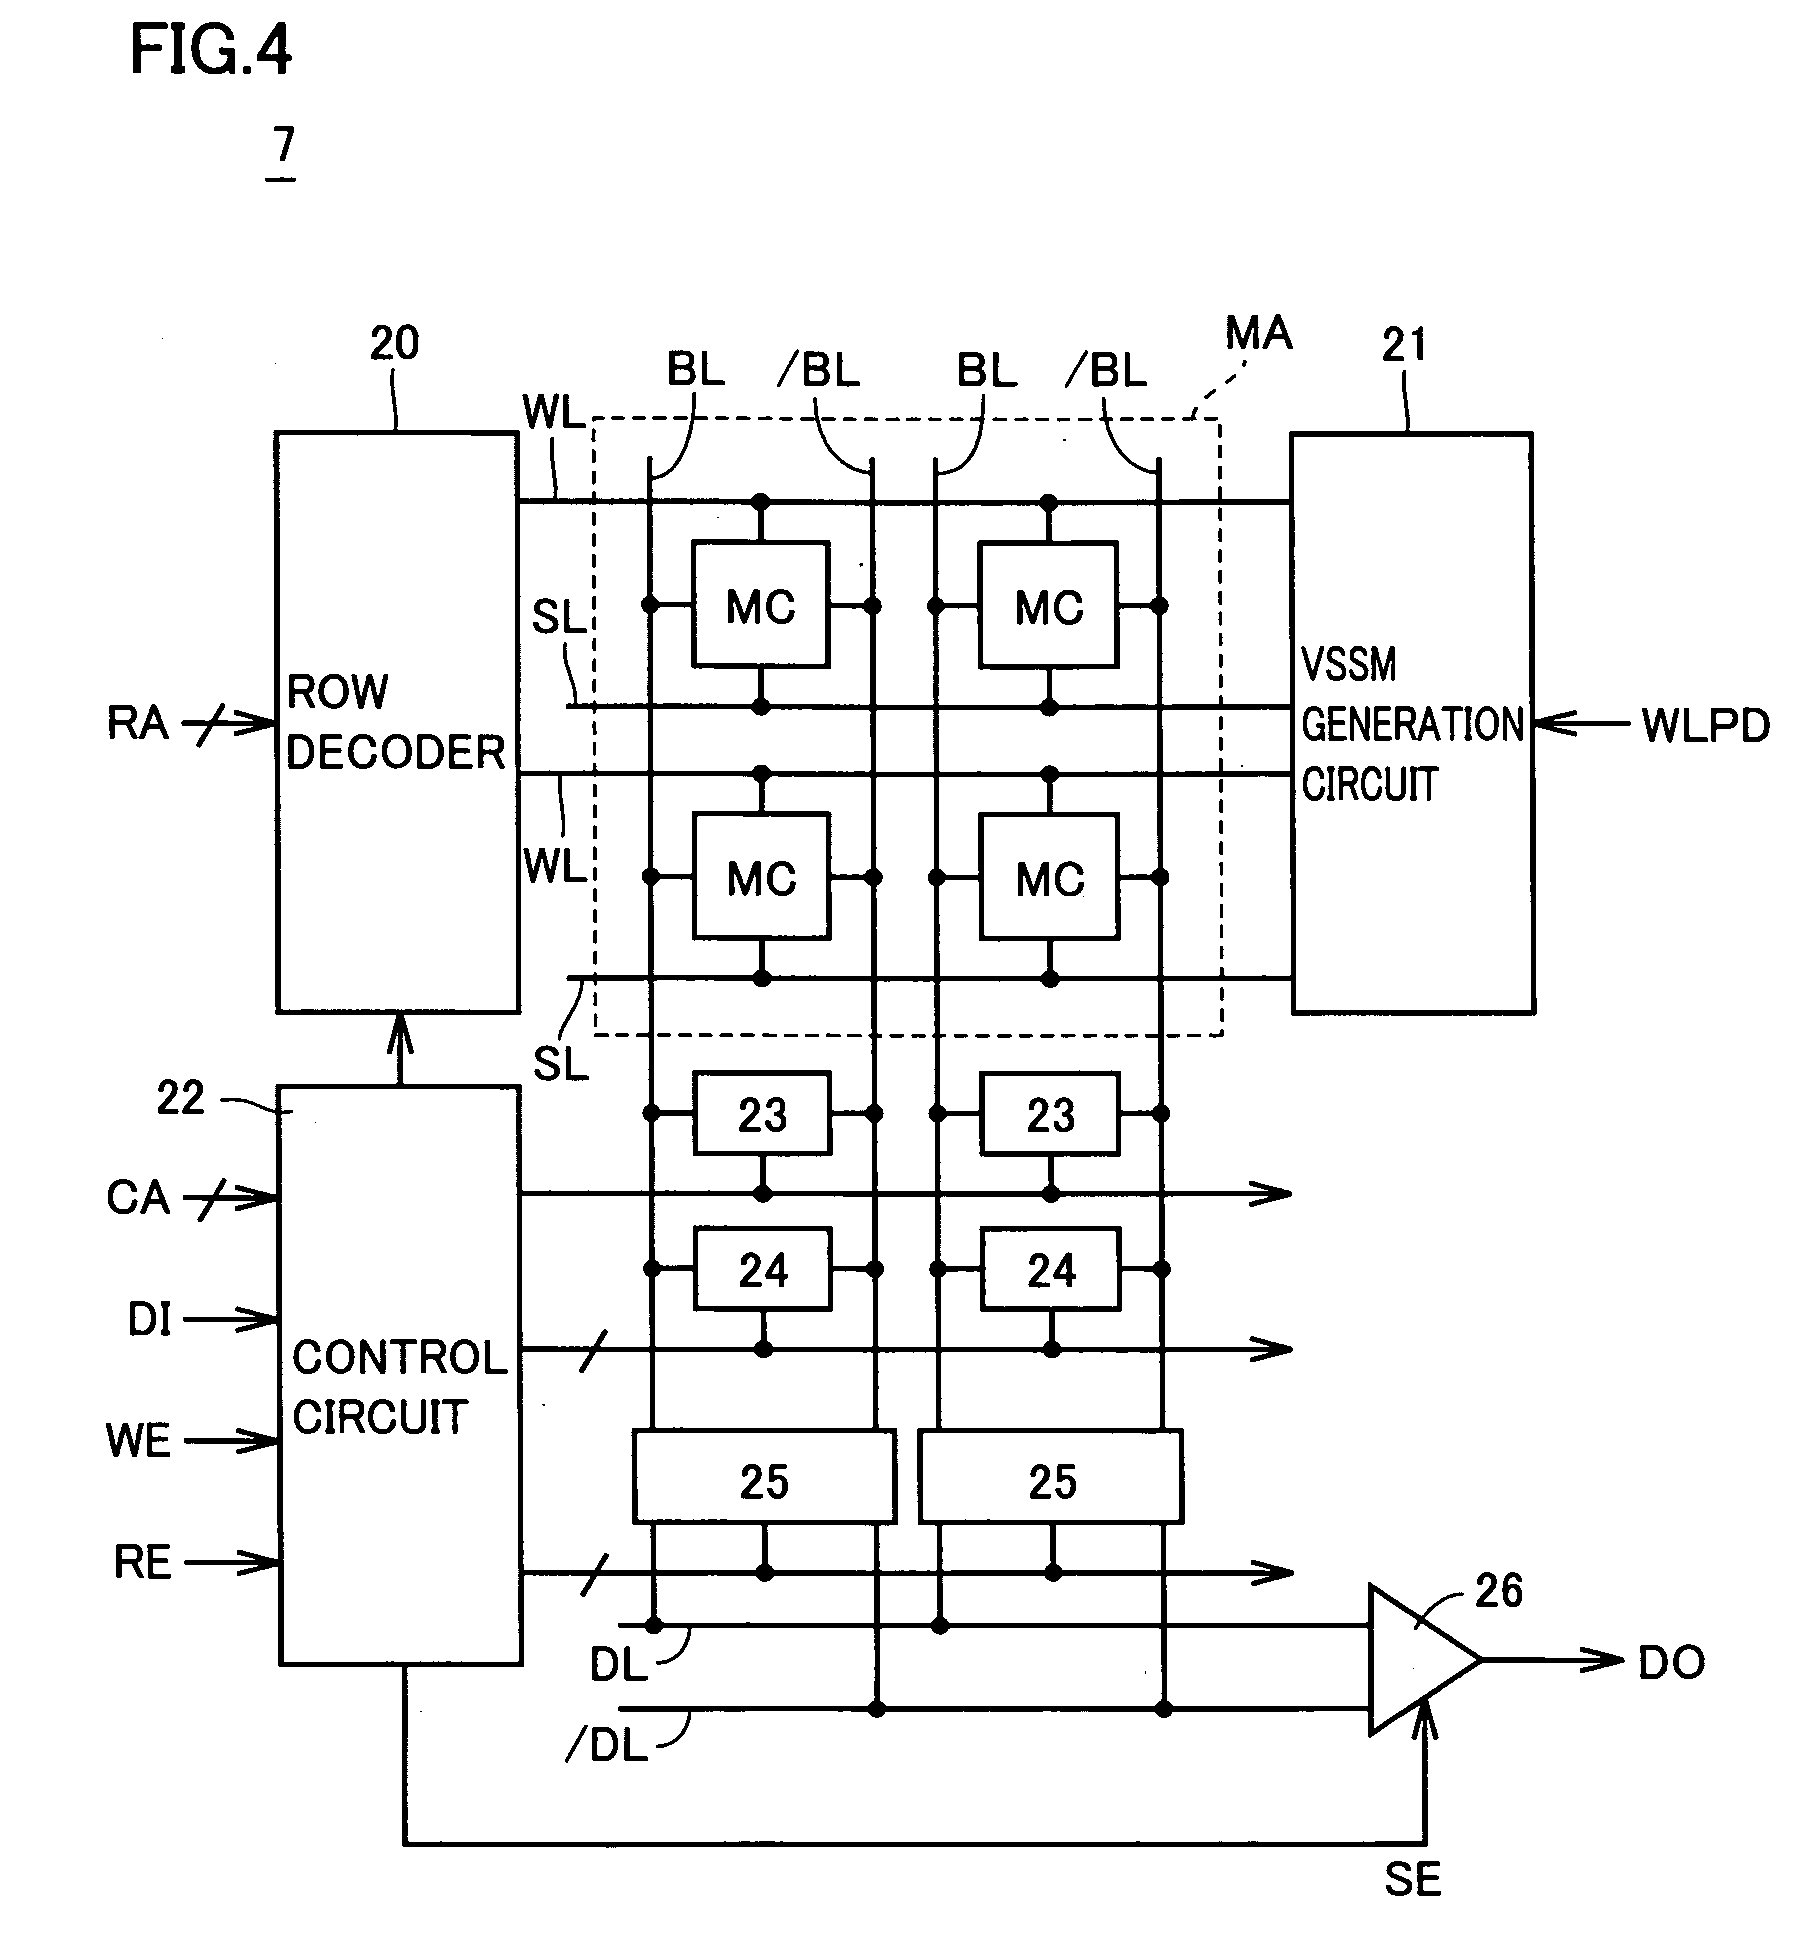 Semiconductor memory device with low standby current